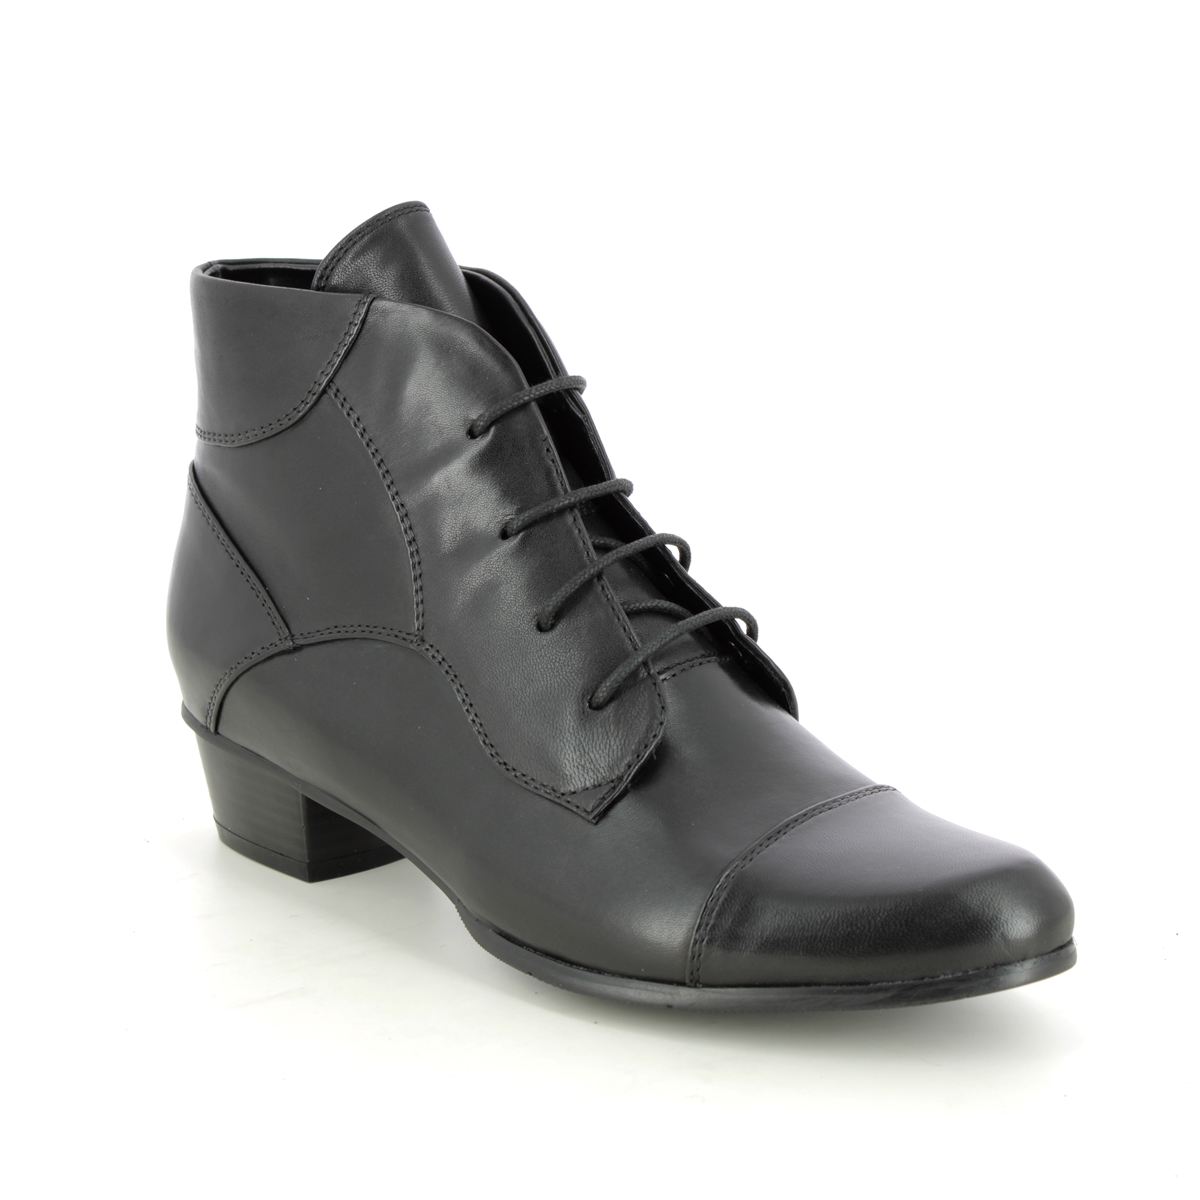 Regarde le Ciel Stefany 123 Lace Black leather Womens Lace Up Boots 0123-003 in a Plain Leather in Size 38